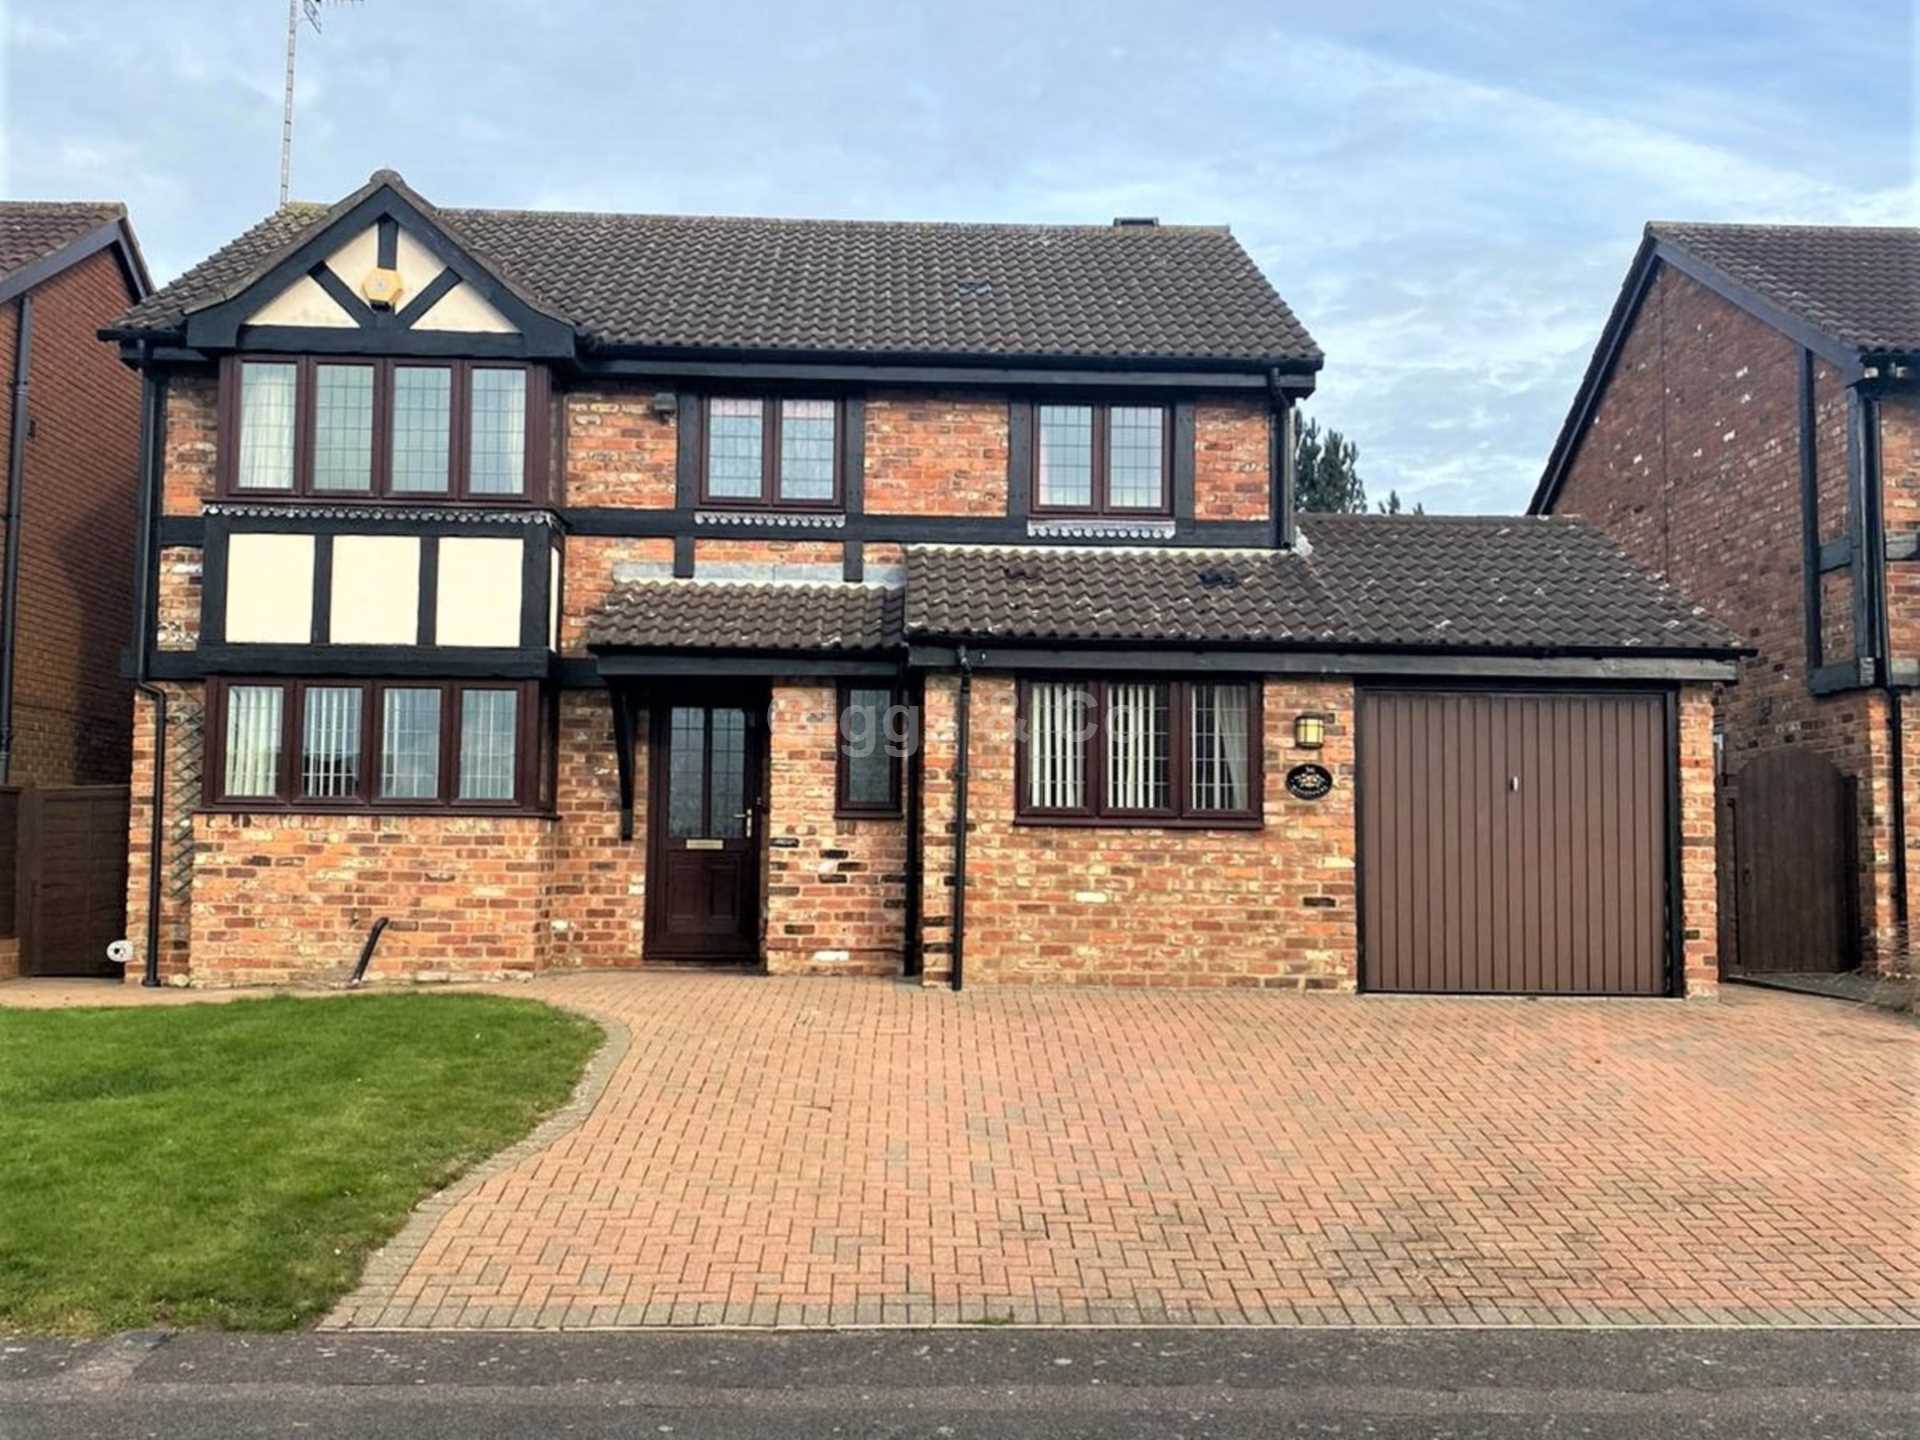 4 bed detached house to rent in Woodmere, Luton, LU3 